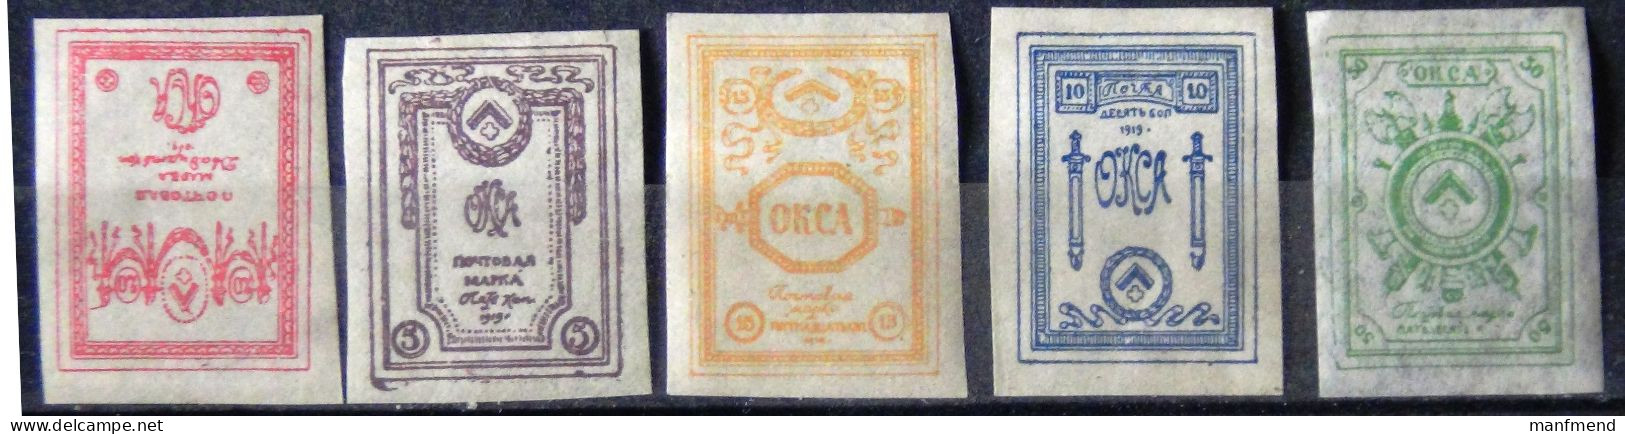 Russia - Civil War Army Of The North OKSA Corp - 1919 -  Yt: 1-5*MNH - Look Scan - 1919-20 Occupation Britannique